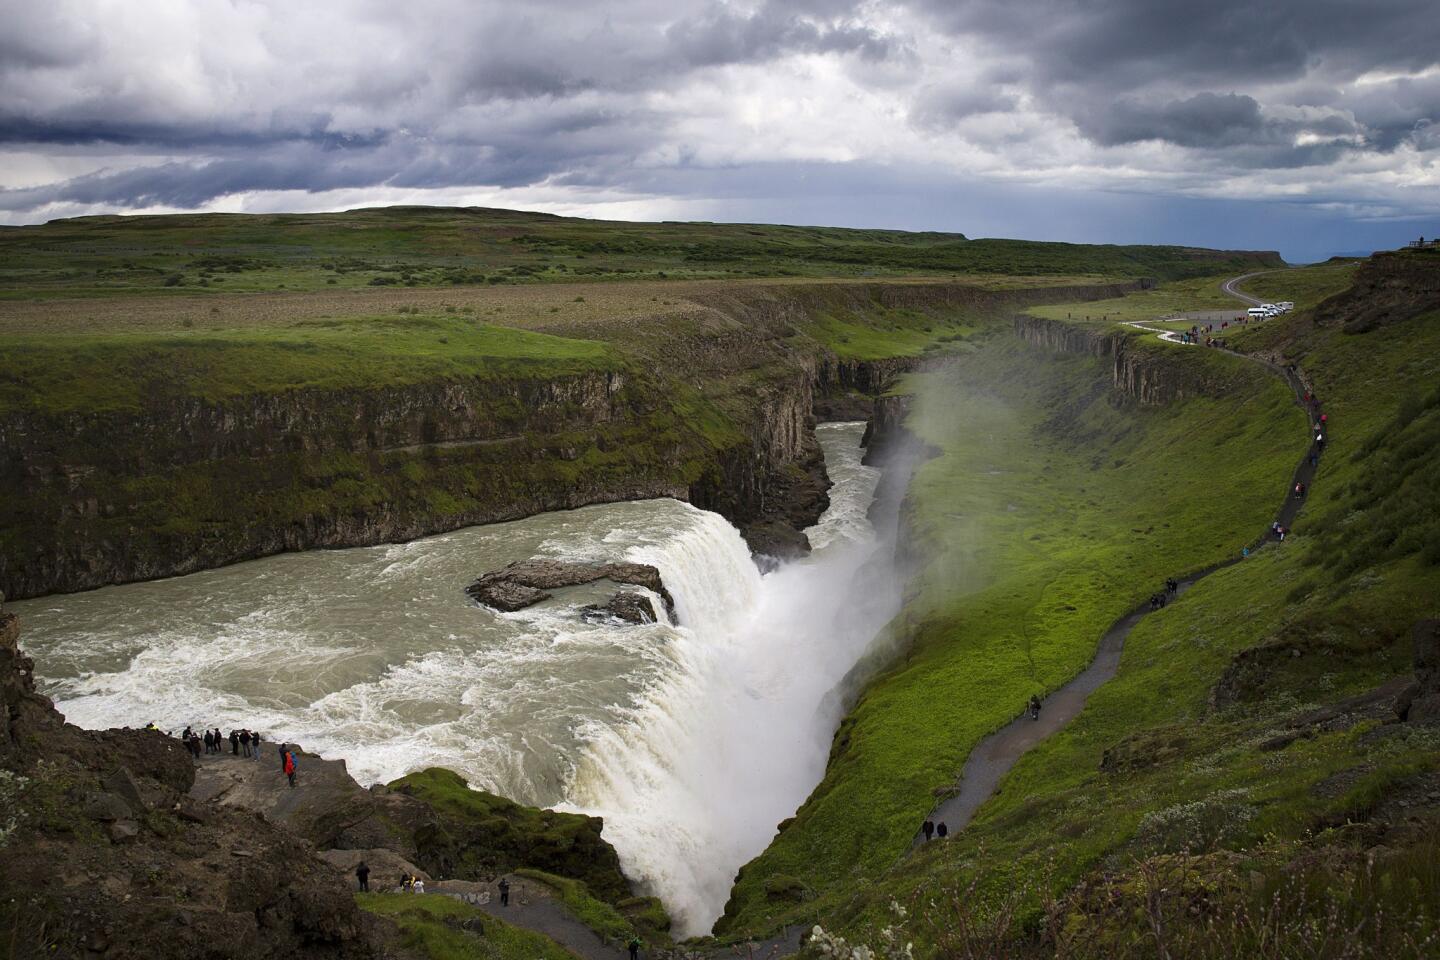 The two-tiered waterfall drops about 105 feet into the Hvita River in south Iceland. On average, water flows through Gullfoss at a rate of about 29,000 gallons per second. Heavy flooding has produced as much as 530,000 gallons per second. For comparison, American and Bridal Veil Falls at Niagara Falls flow at an average rate of about 76,000 gallons per second.